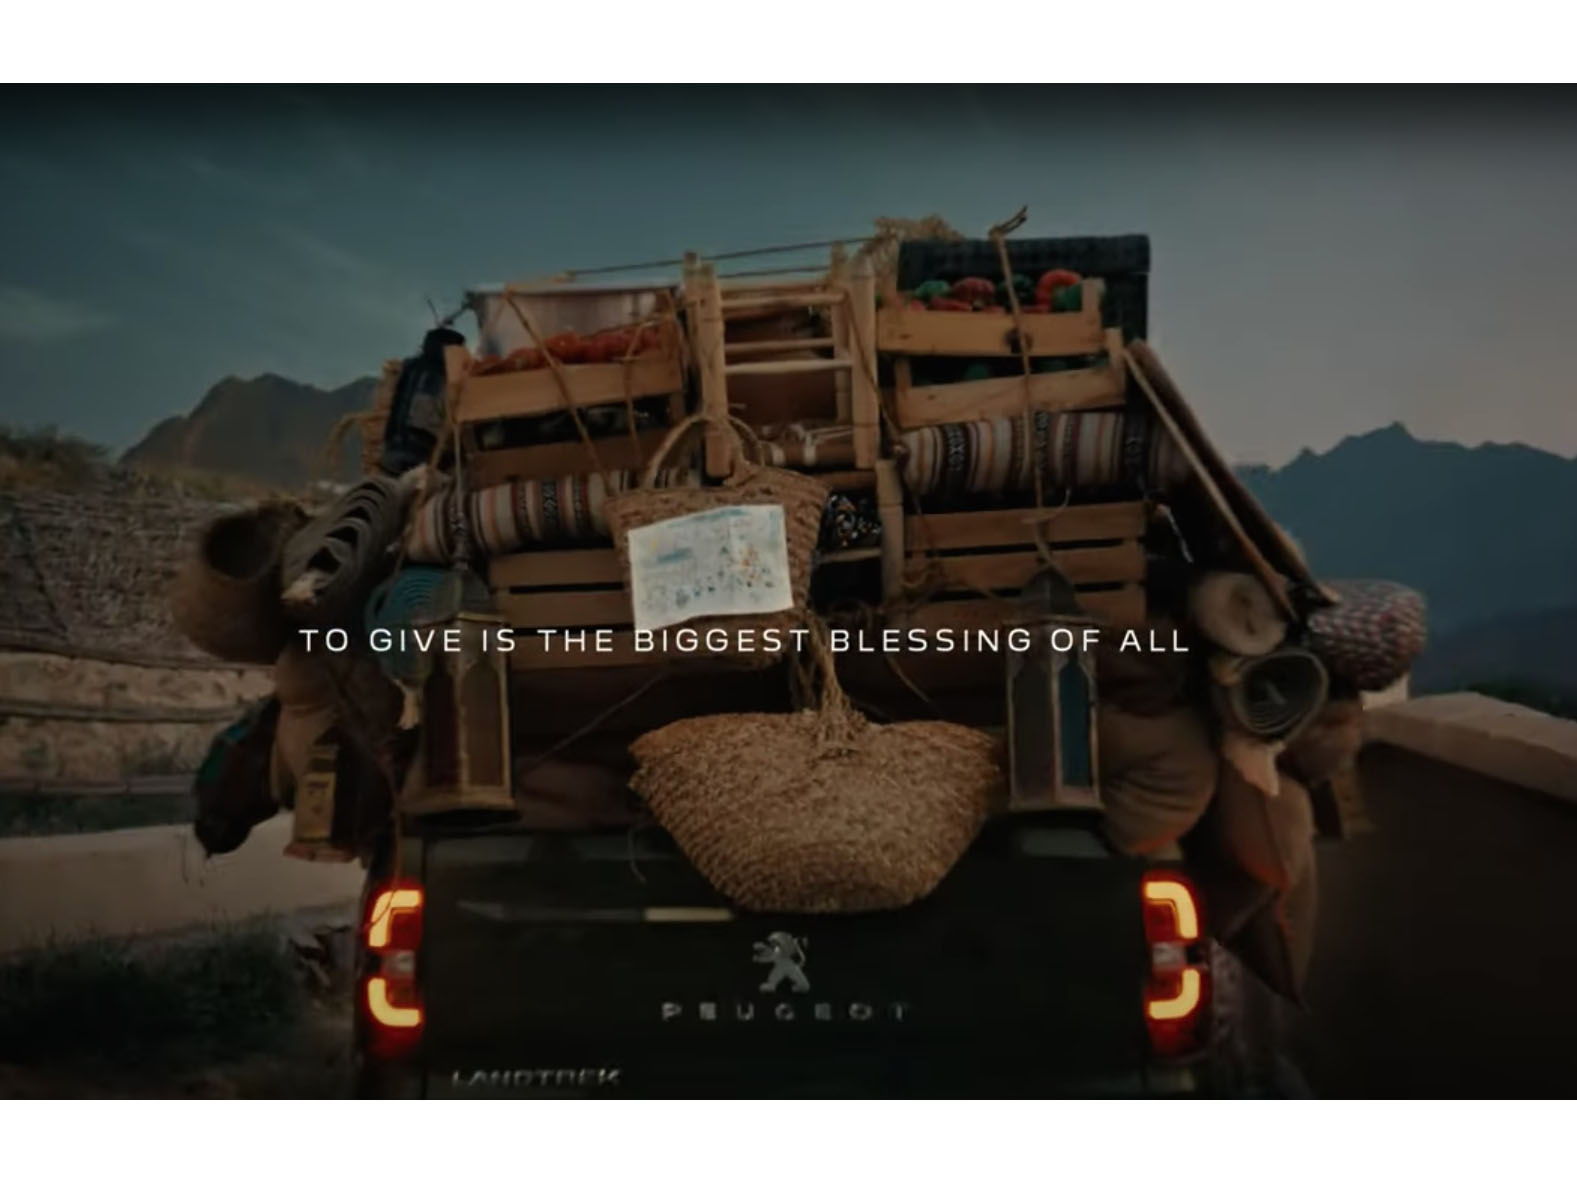  Science & Sunshine highlights the importance of giving in new Peugeot Ramadan film